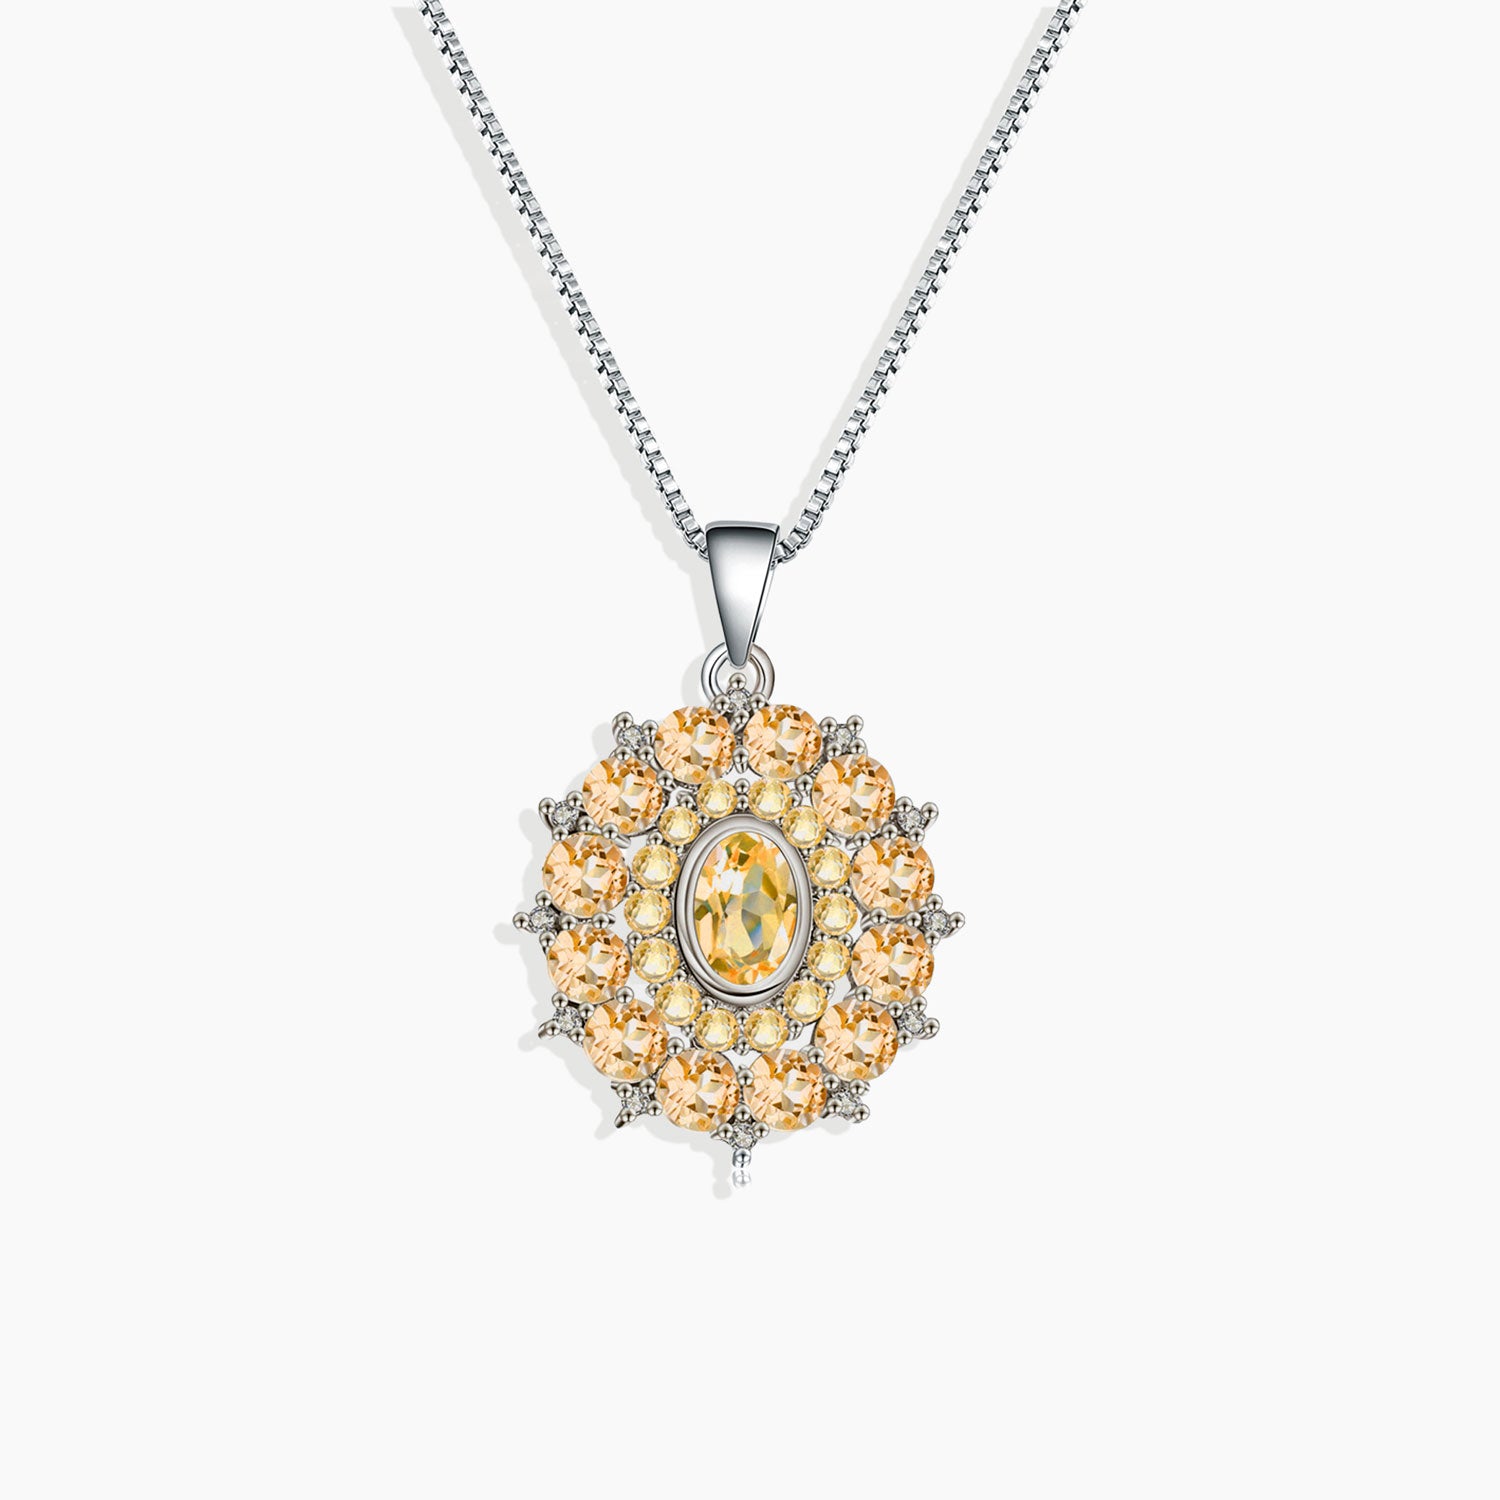 Citrine Crown Pendant in Sterling Silver - Exquisite gemstone jewelry showcasing a sparkling citrine stone set in intricately designed sterling silver crown pendant.